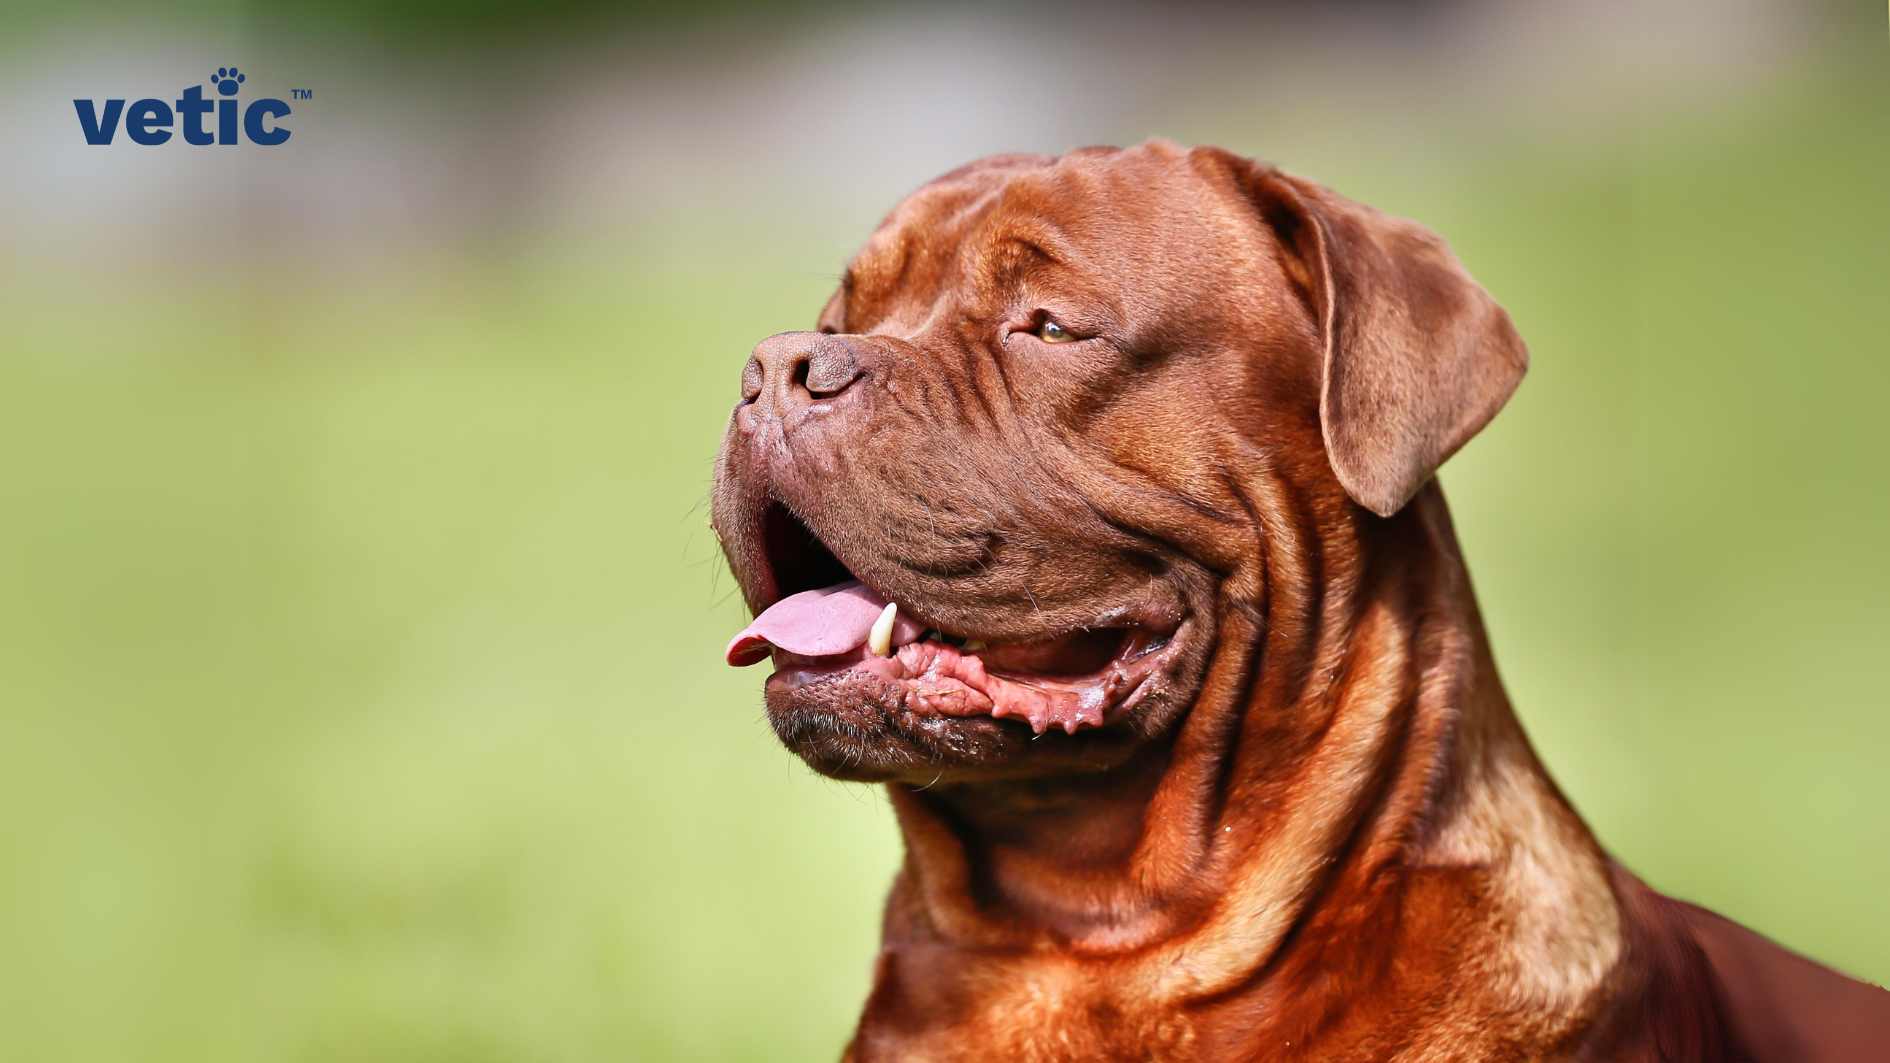 An image of a French Mastiff in India. The text “vetic” in the top left corne. The dog looks calm and relaxed, as its tongue is sticking out slightly. The image was taken outdoors, as there is greenery in the background.